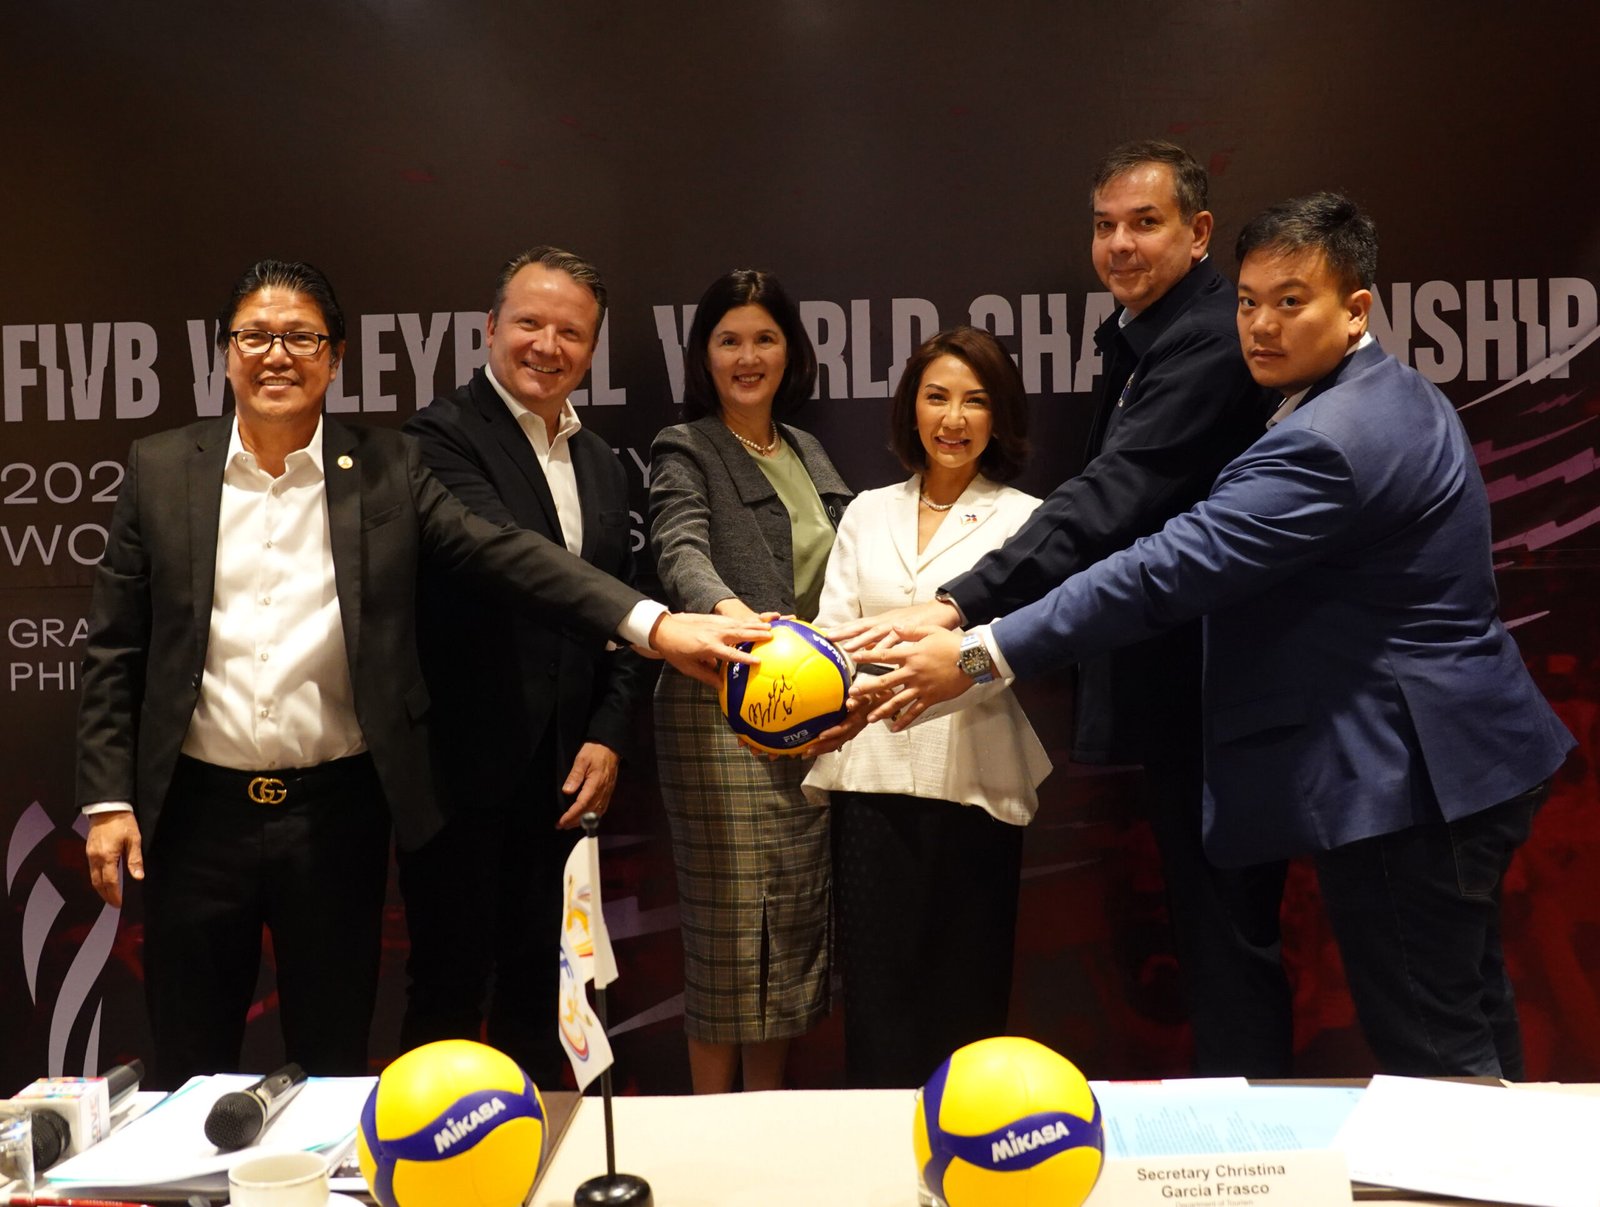 PH Senator Pia Cayetano and Tourism Secretary Christina Garcia Frasco (third and fourth from left) with (from left) Philippine National Volleyball Federation (PNVF) president Ramon “Tats” Suzara, Volleyball World CEO Finn Taylor, Philippine Sports Commission chairman Richard Bachmann and Philippine Olympic Committee secretary-general Atty. Warton Chan. [photo credit: PNVF]